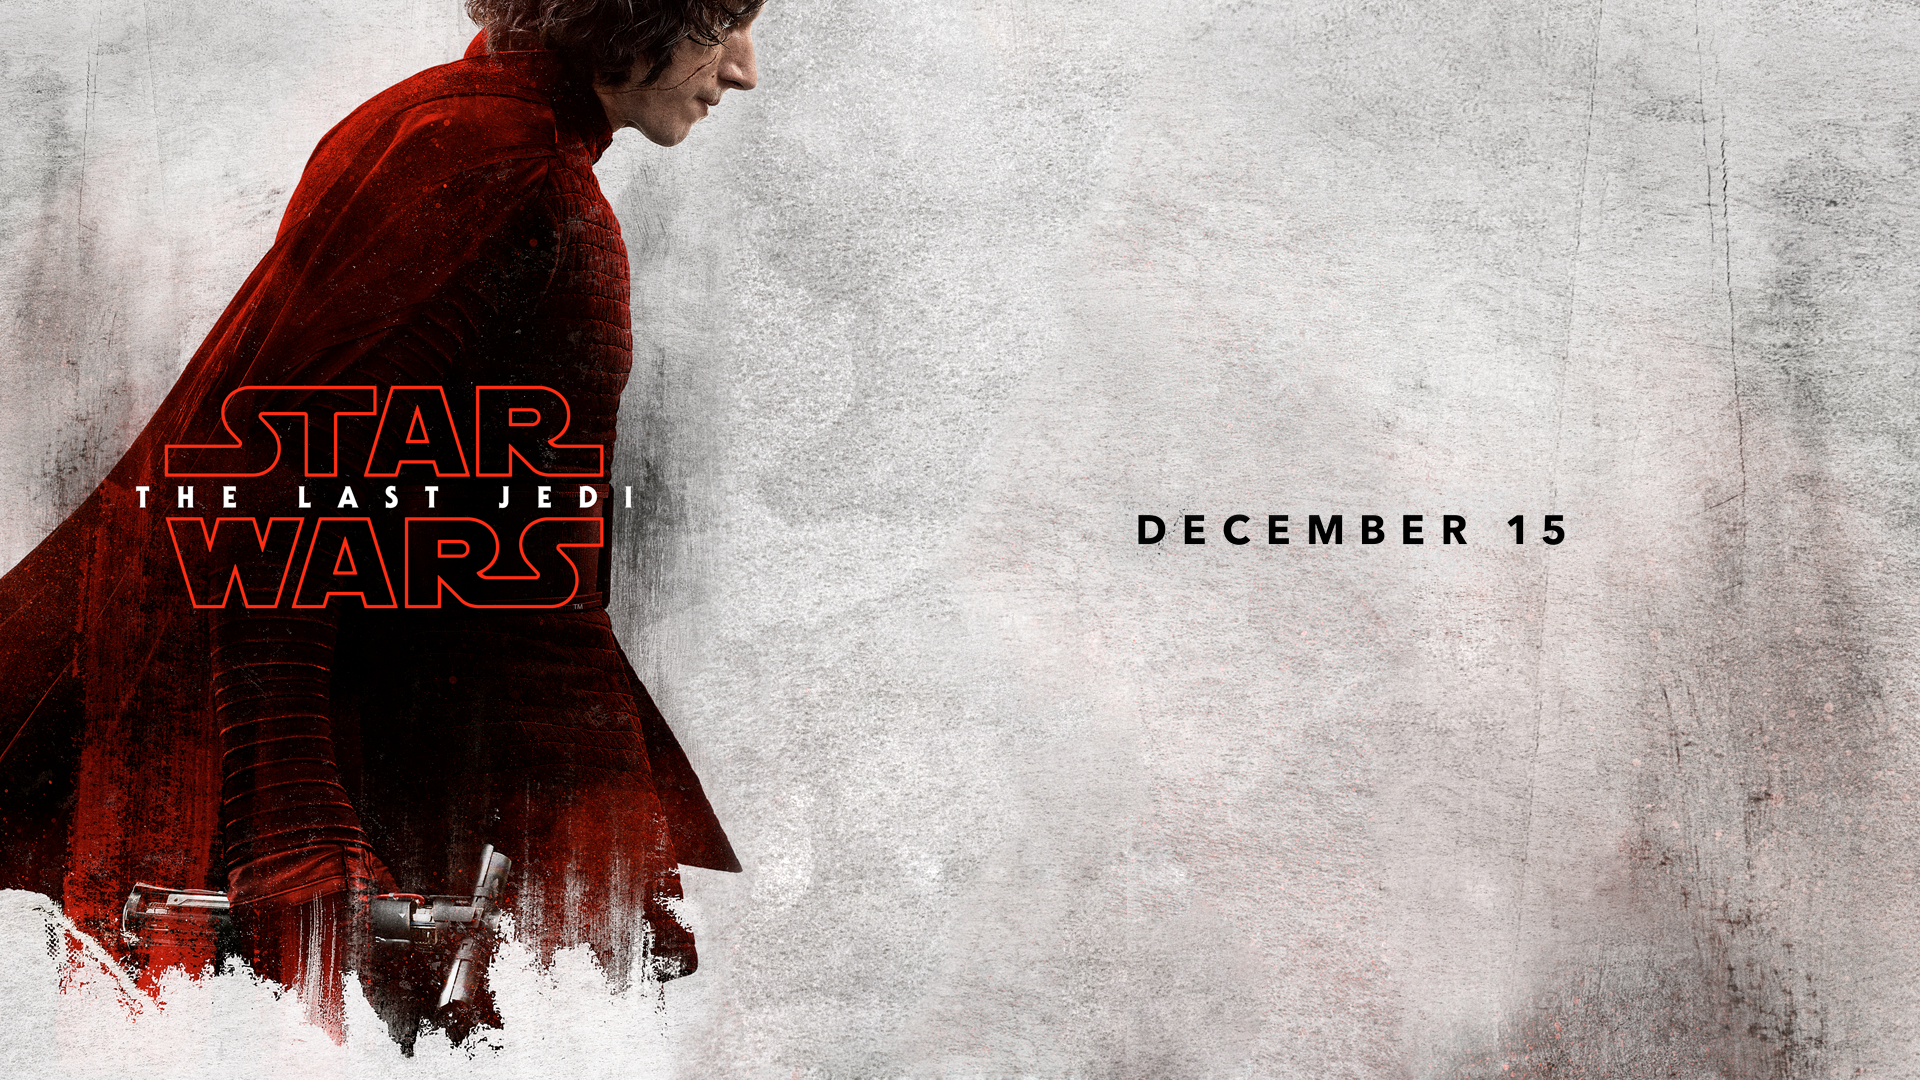 General 1920x1080 Star Wars: The Last Jedi movies Kylo Ren The First Order